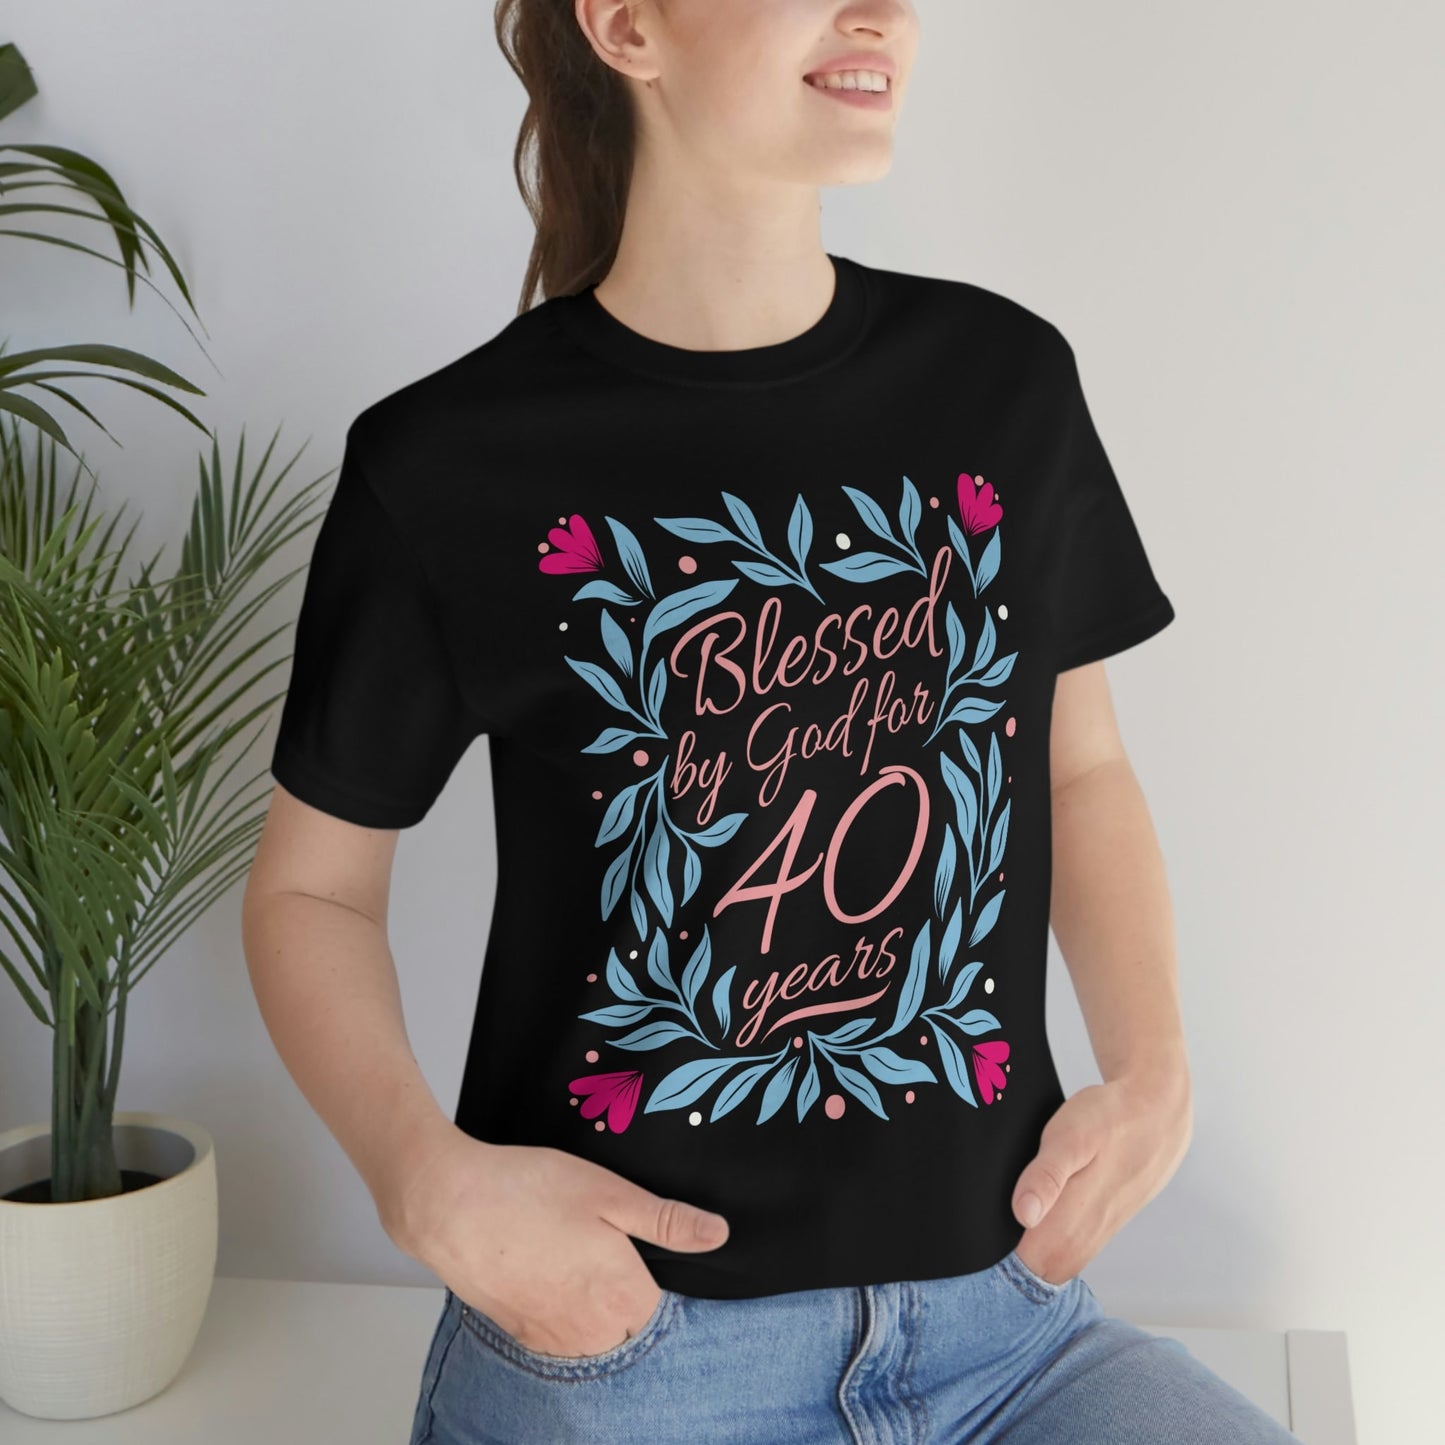 Blessed by God for 40 years gift t-shirt for women or wife, 40th Anniversary t-shirt